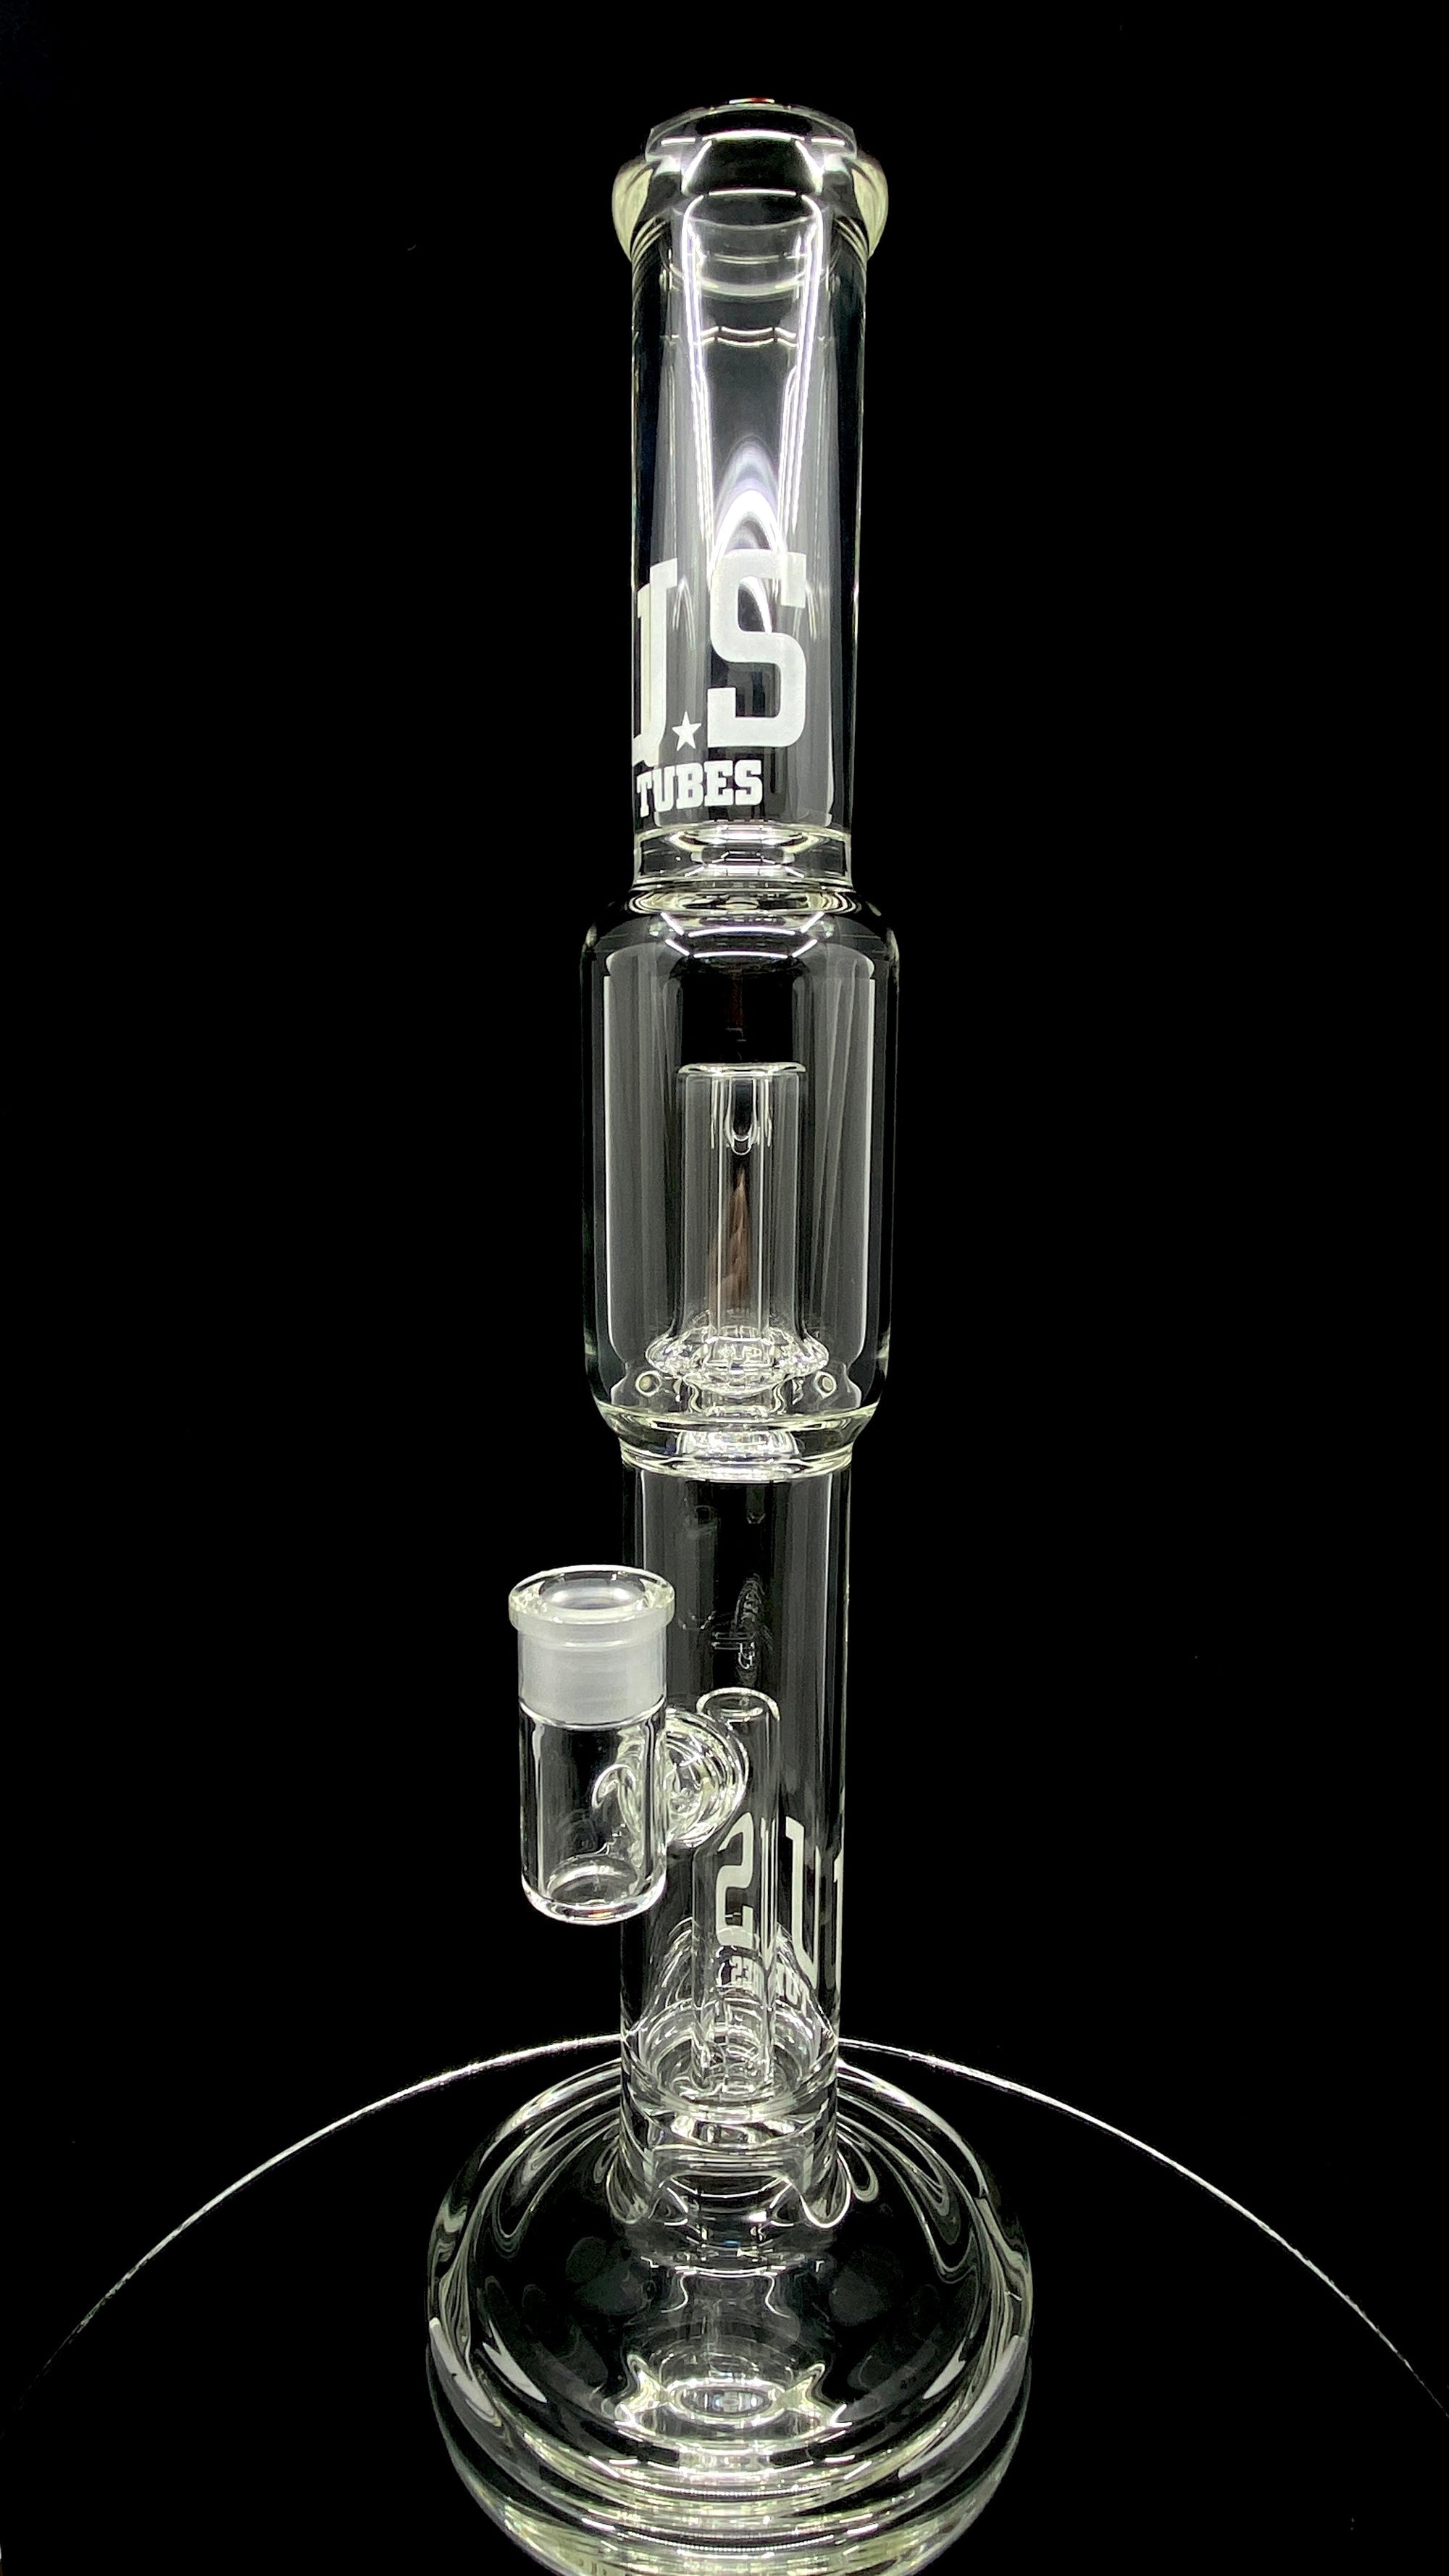 US Tubes Straight Fixed with Circ Percolator